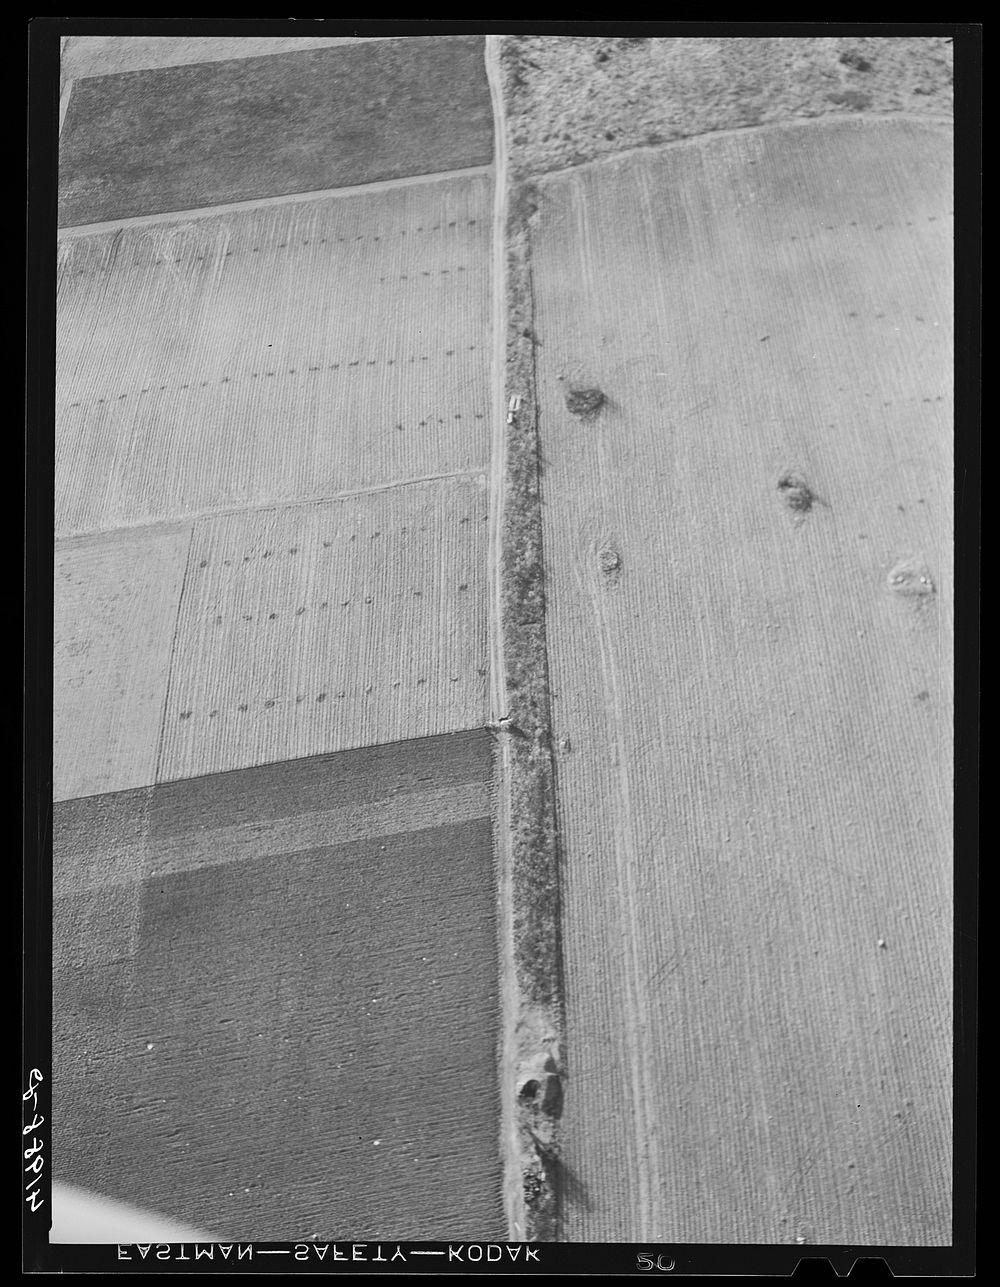 [Untitled photo, possibly related to: Potato field after the crop was gathered. The long horizontal rows are waste vines…